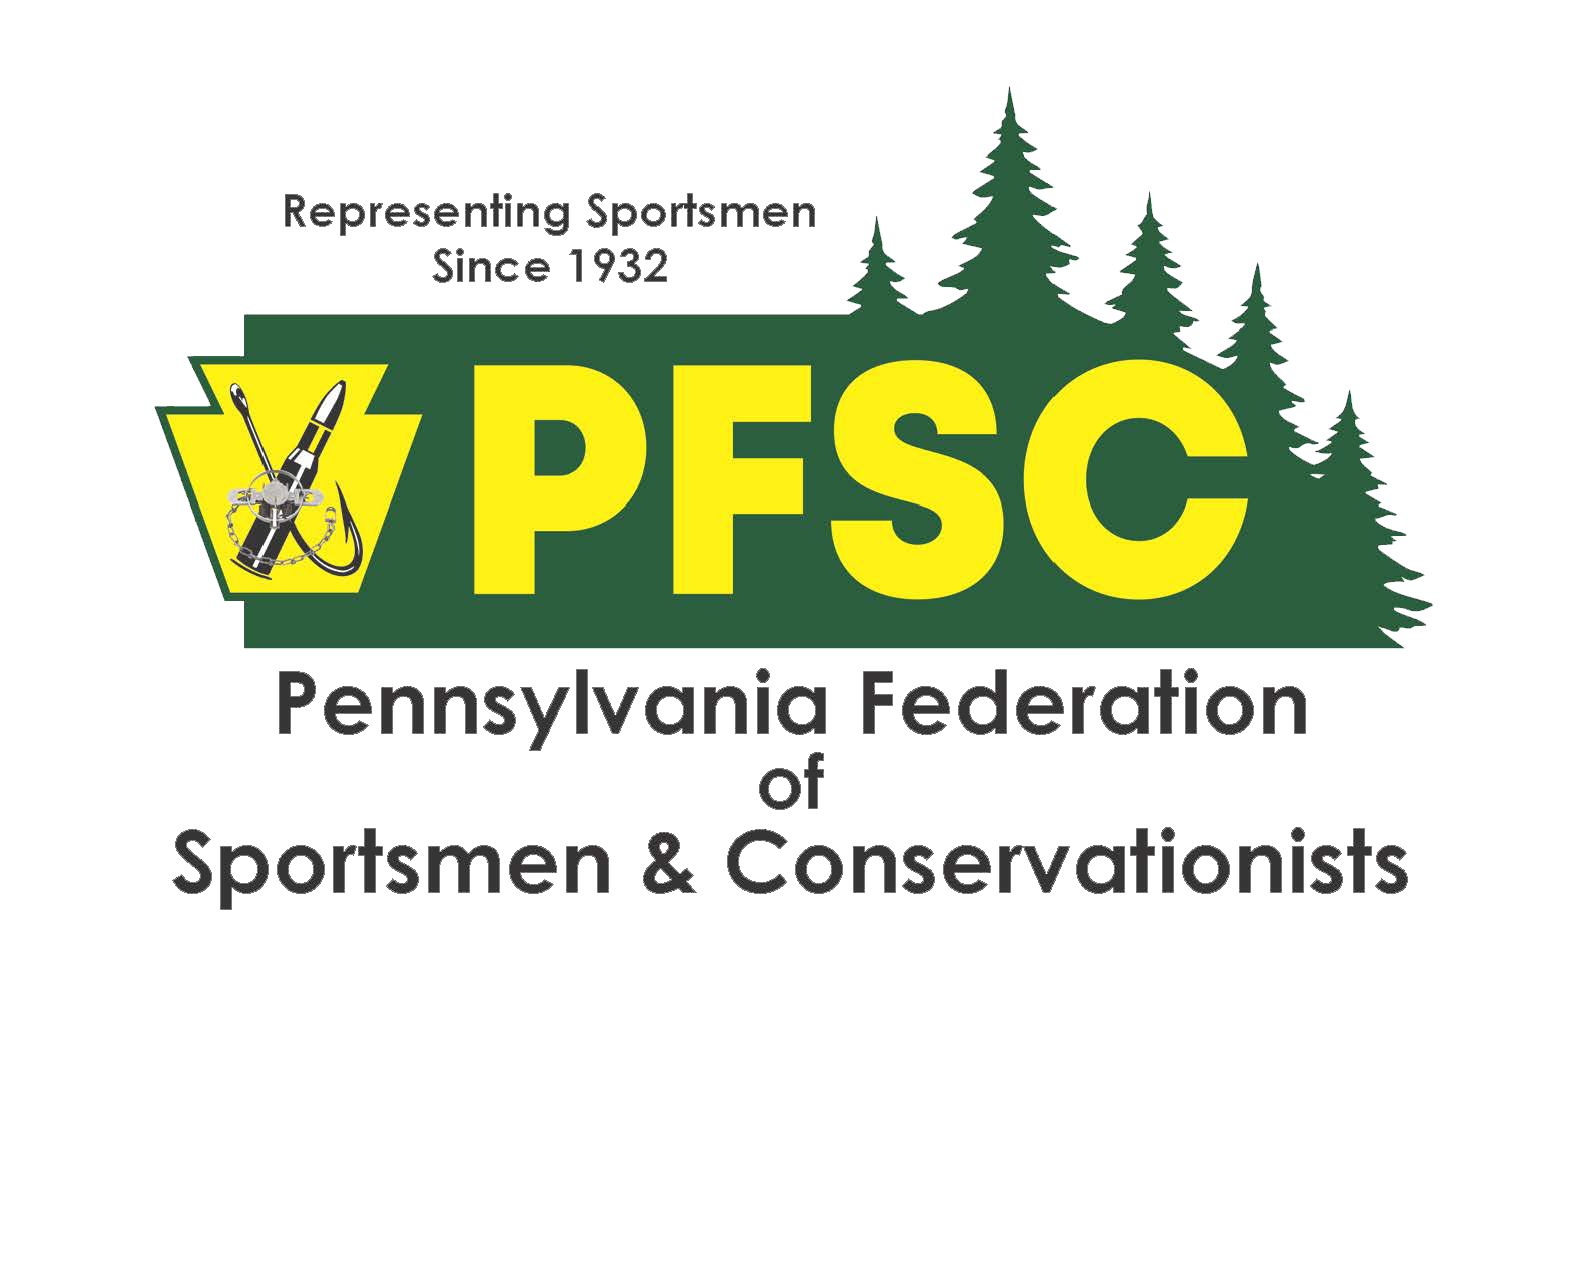 Pennsylvania Federation of Sportsmen and Conservationists